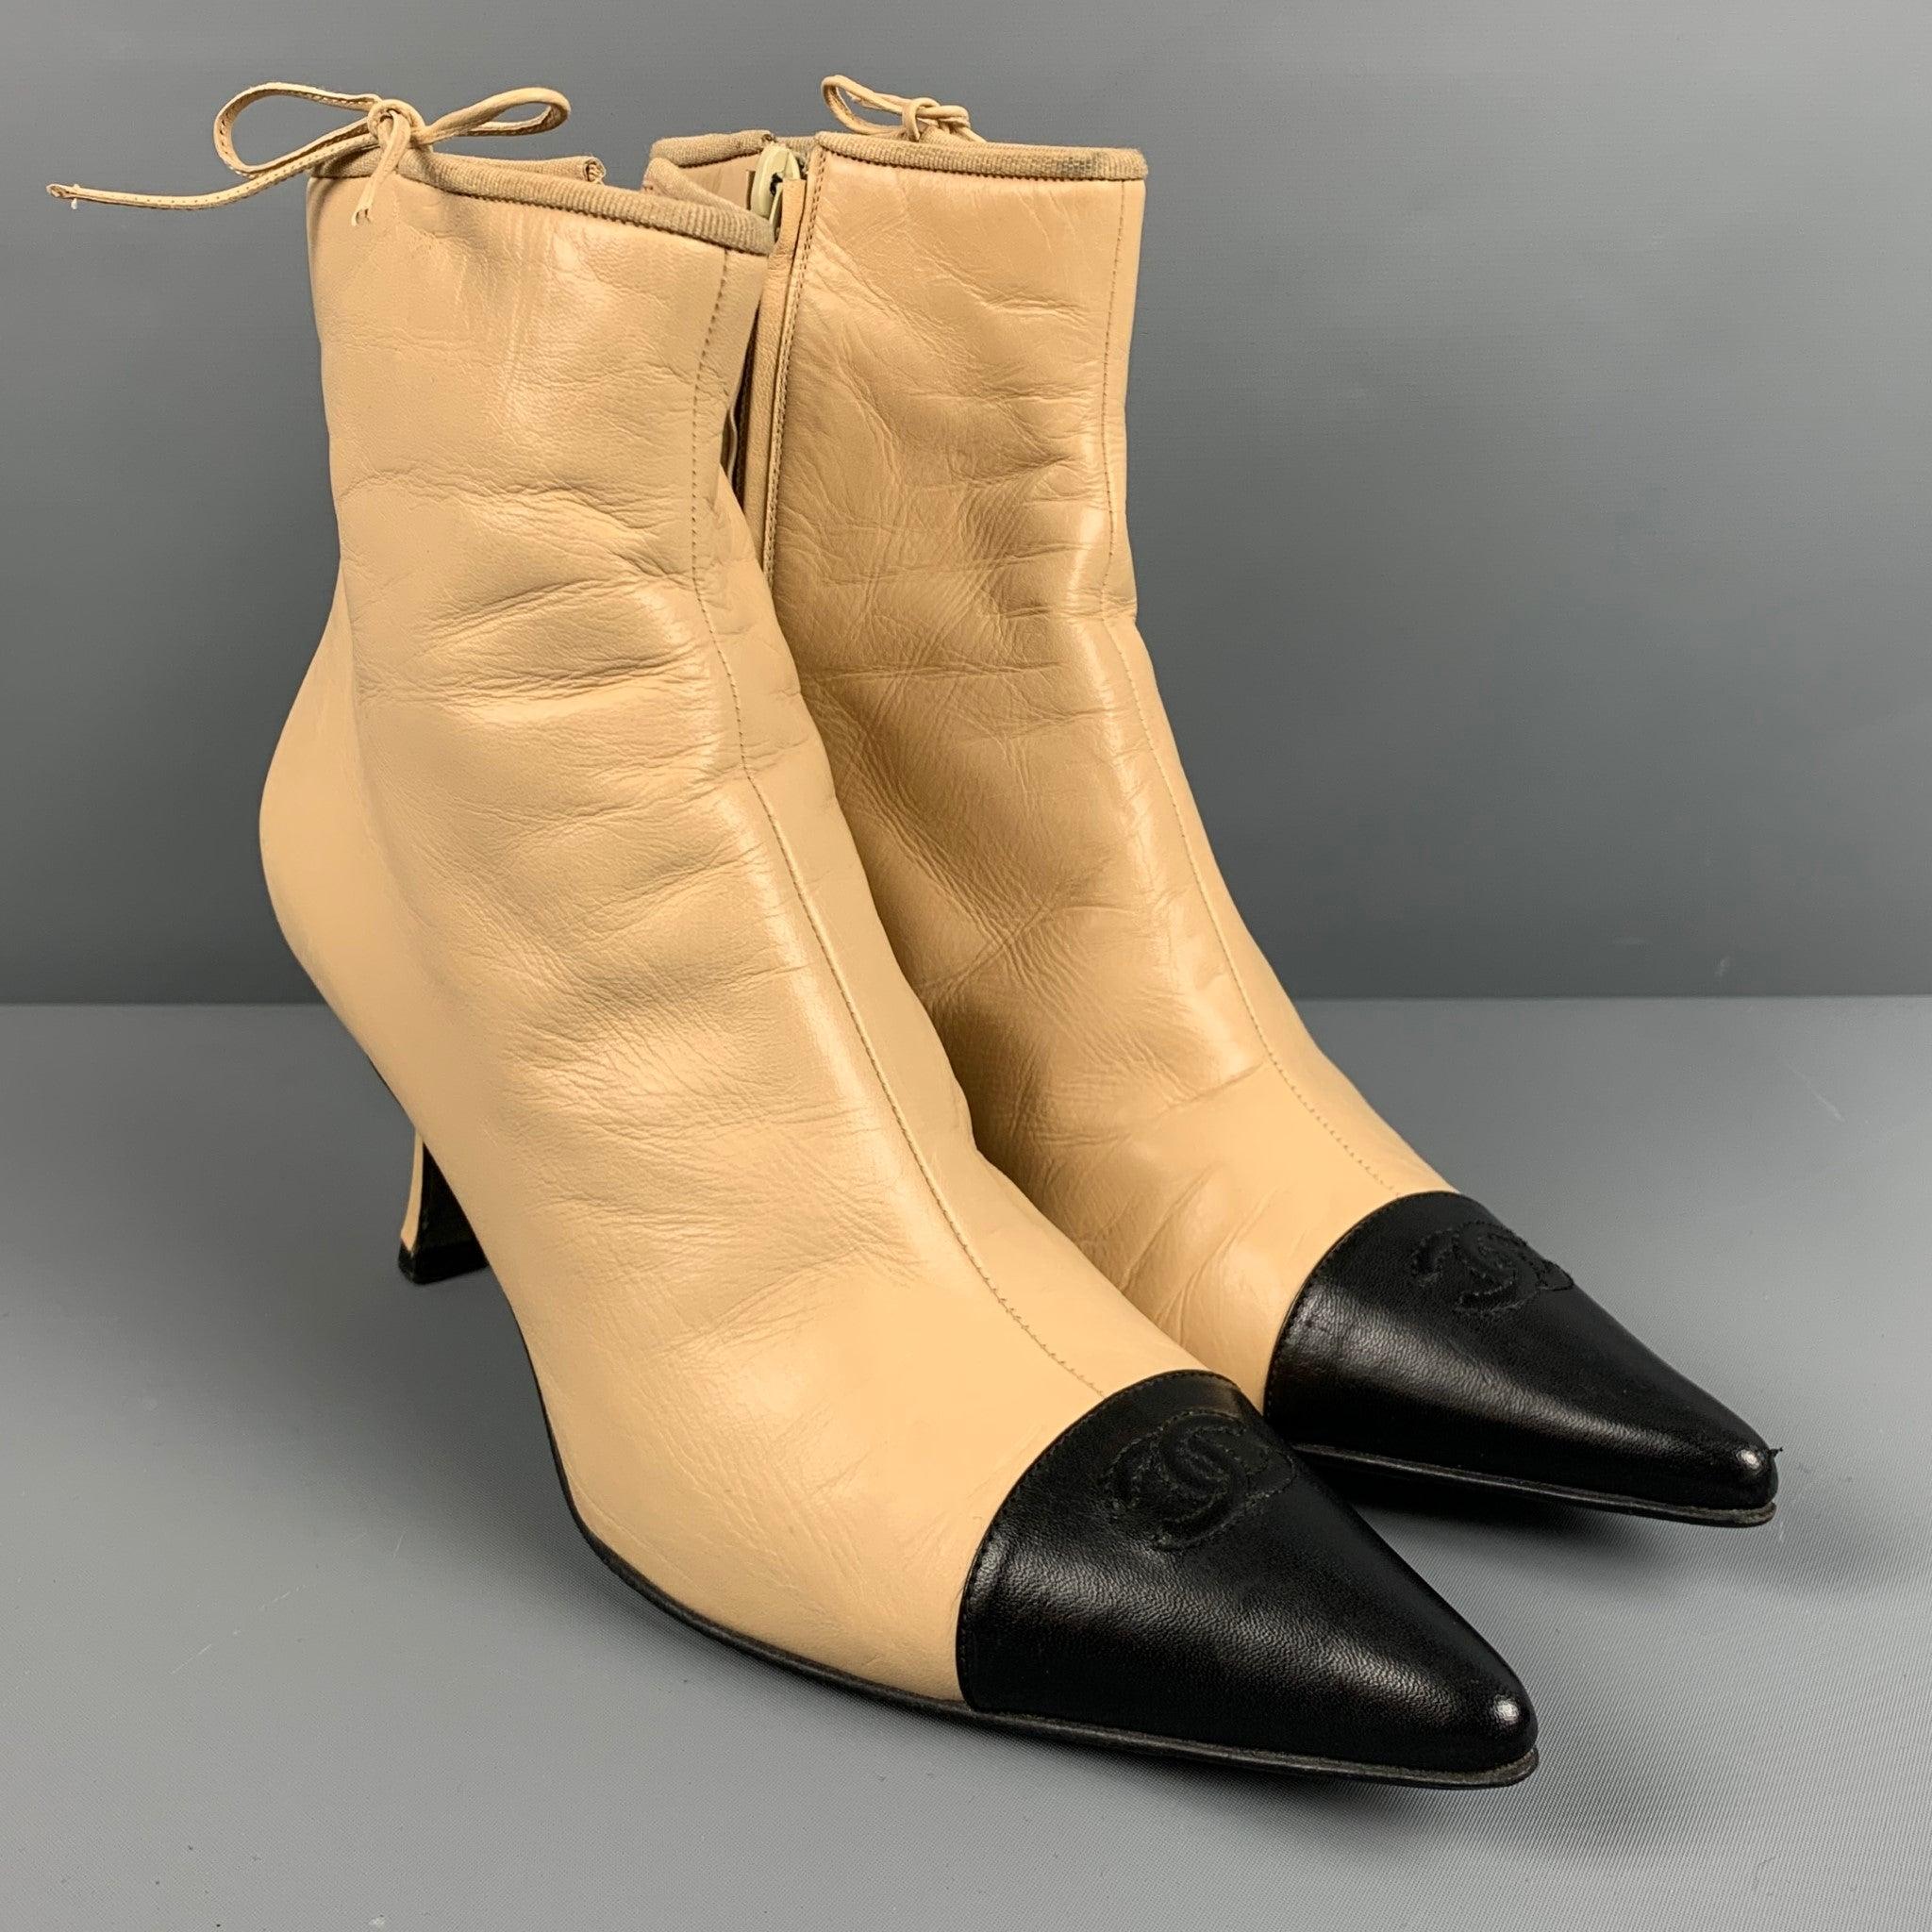 CHANEL boots
in a beige leather fabric featuring black leather contrast cap with monogram pointed toe, side bows, and side zipper closure. Made in Italy.Very Good Pre-Owned Condition. Minor marks. 

Marked:   40 

Measurements: 
  Length: 10.5